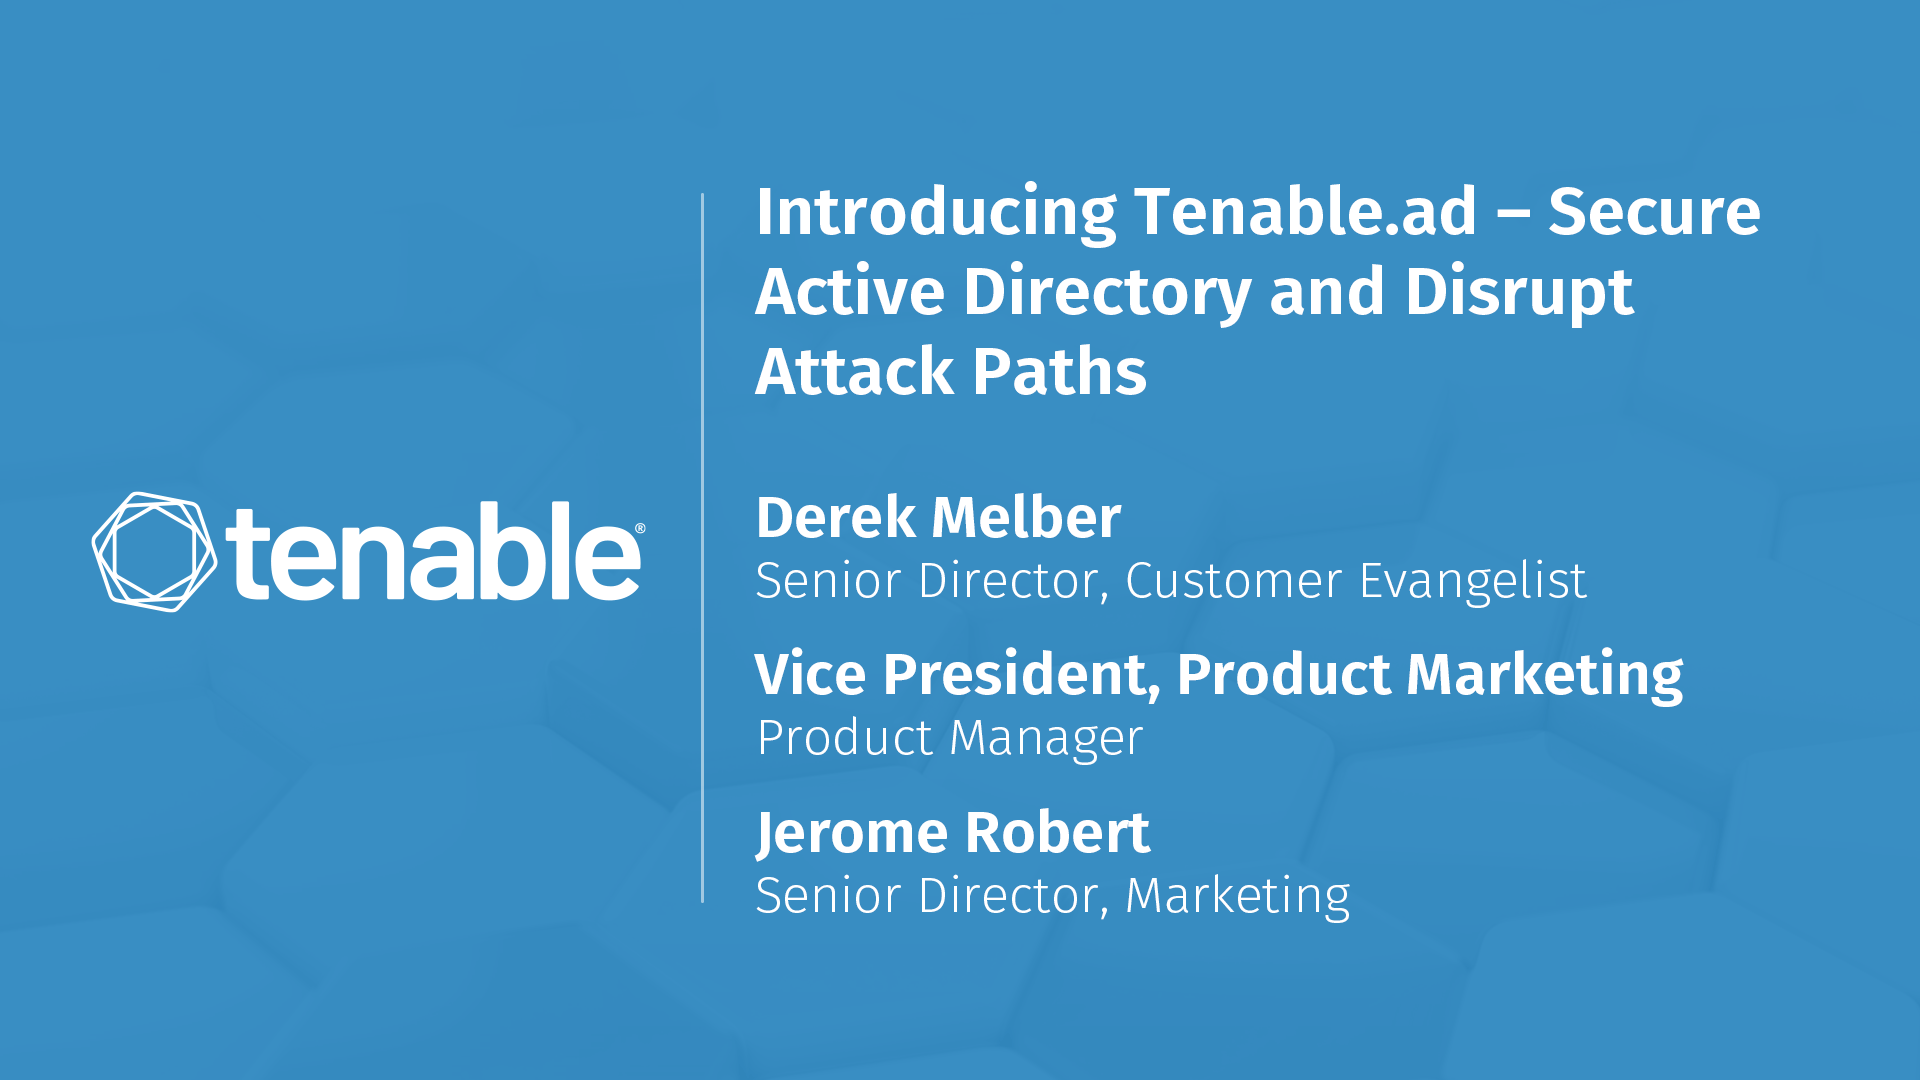 Introducing Tenable Identity Exposure: Secure Active Directory and Disrupt Attack Paths